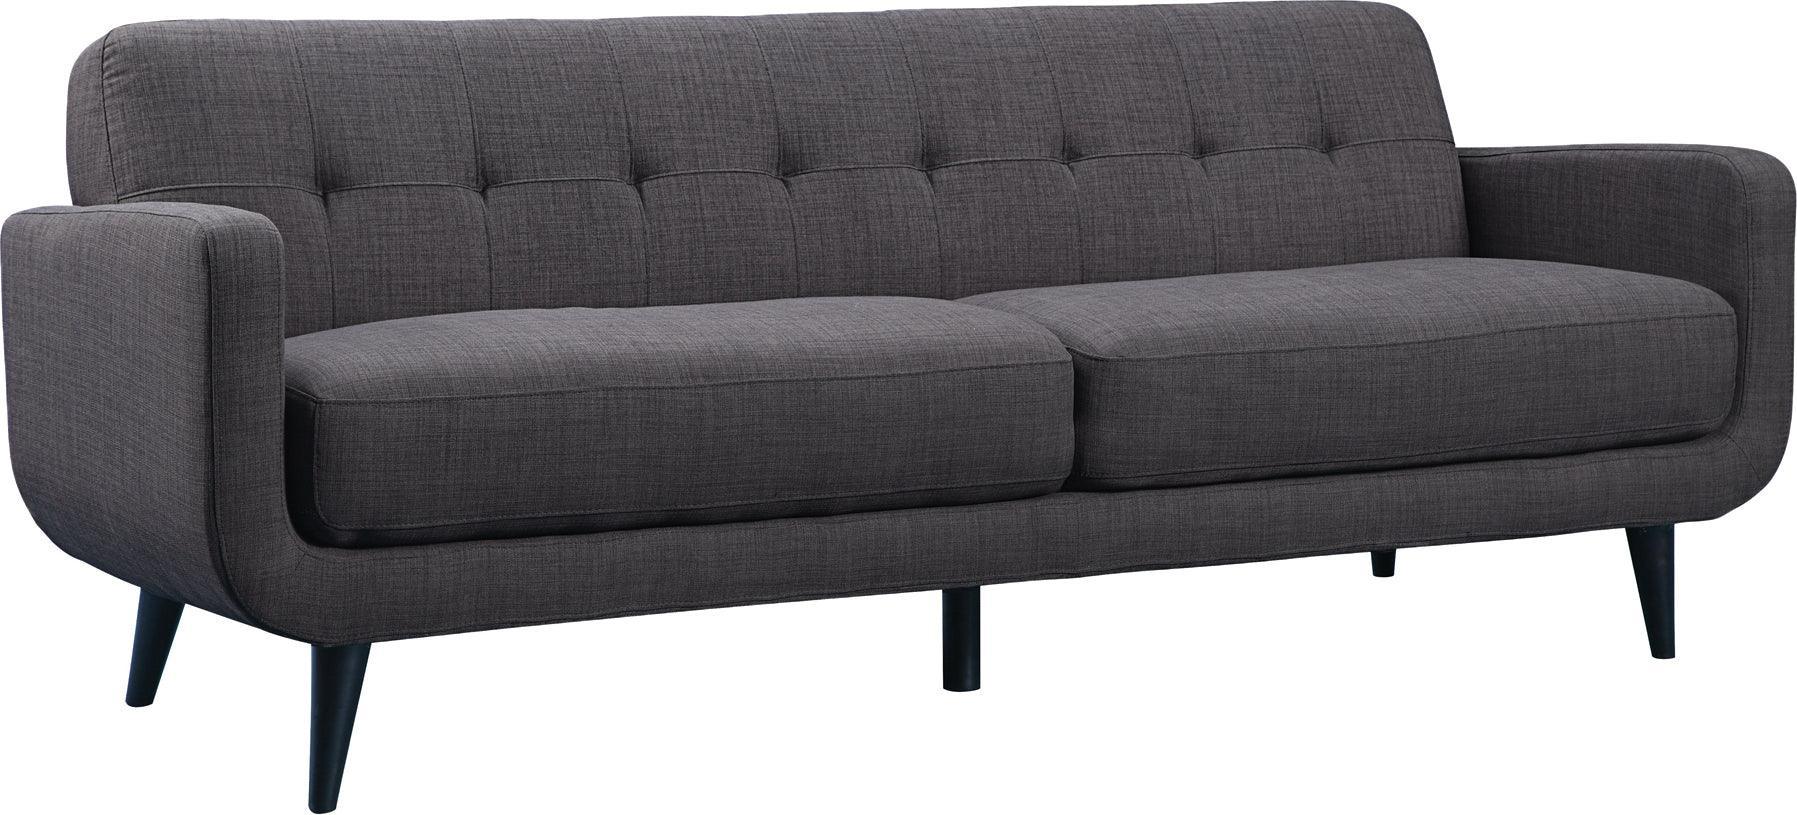 Elements Sofas & Couches - Hailey Sofa Charcoal